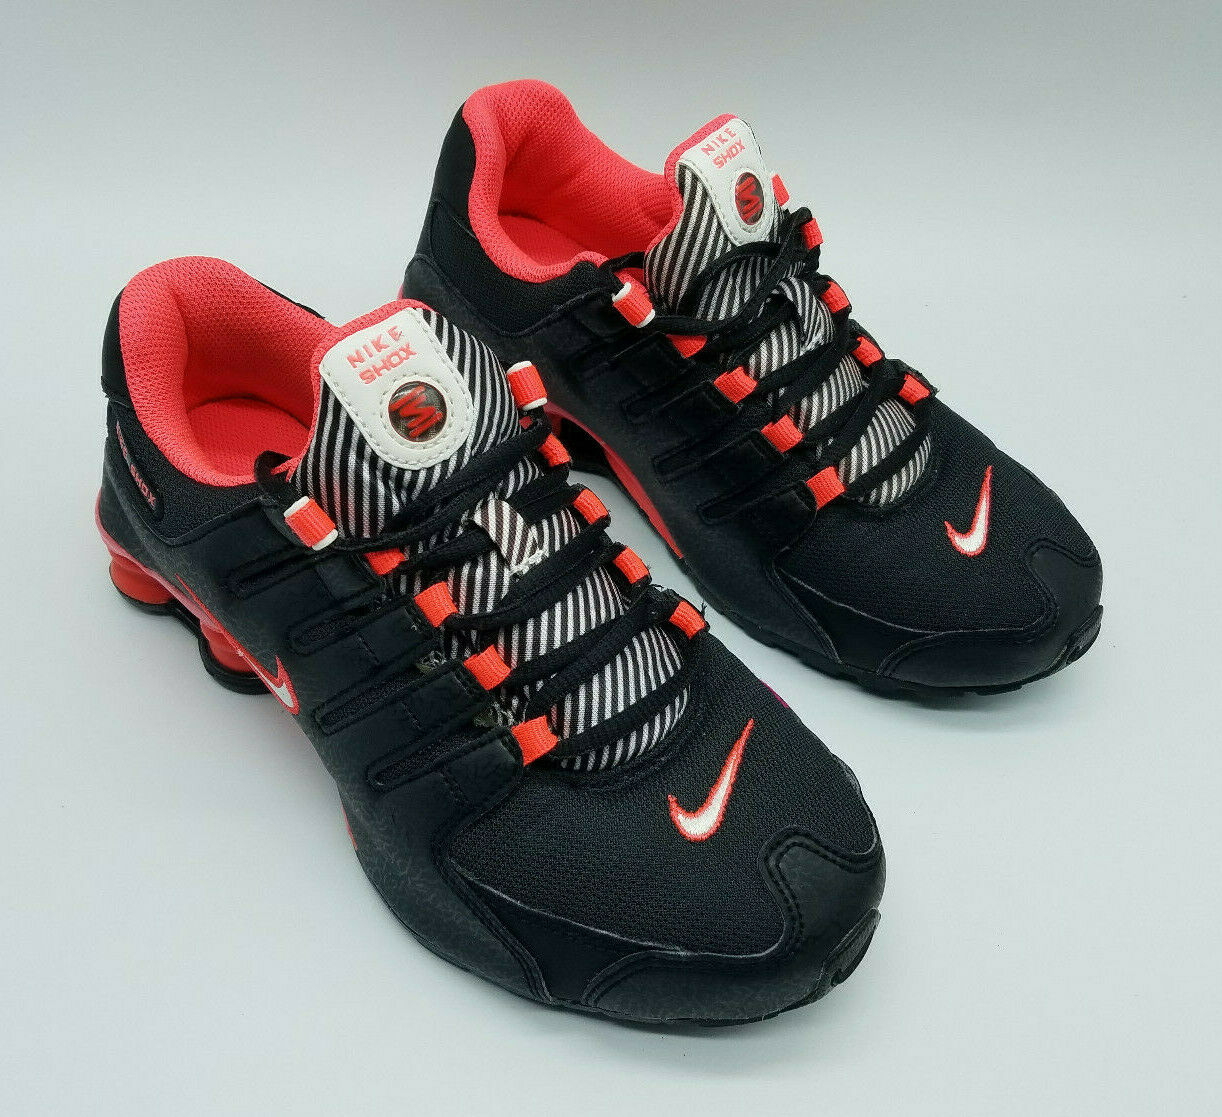 Nike Shox Youth Running Shoes Black/Pink 310480-001 Size 5Y/ Women’s Size 6.5